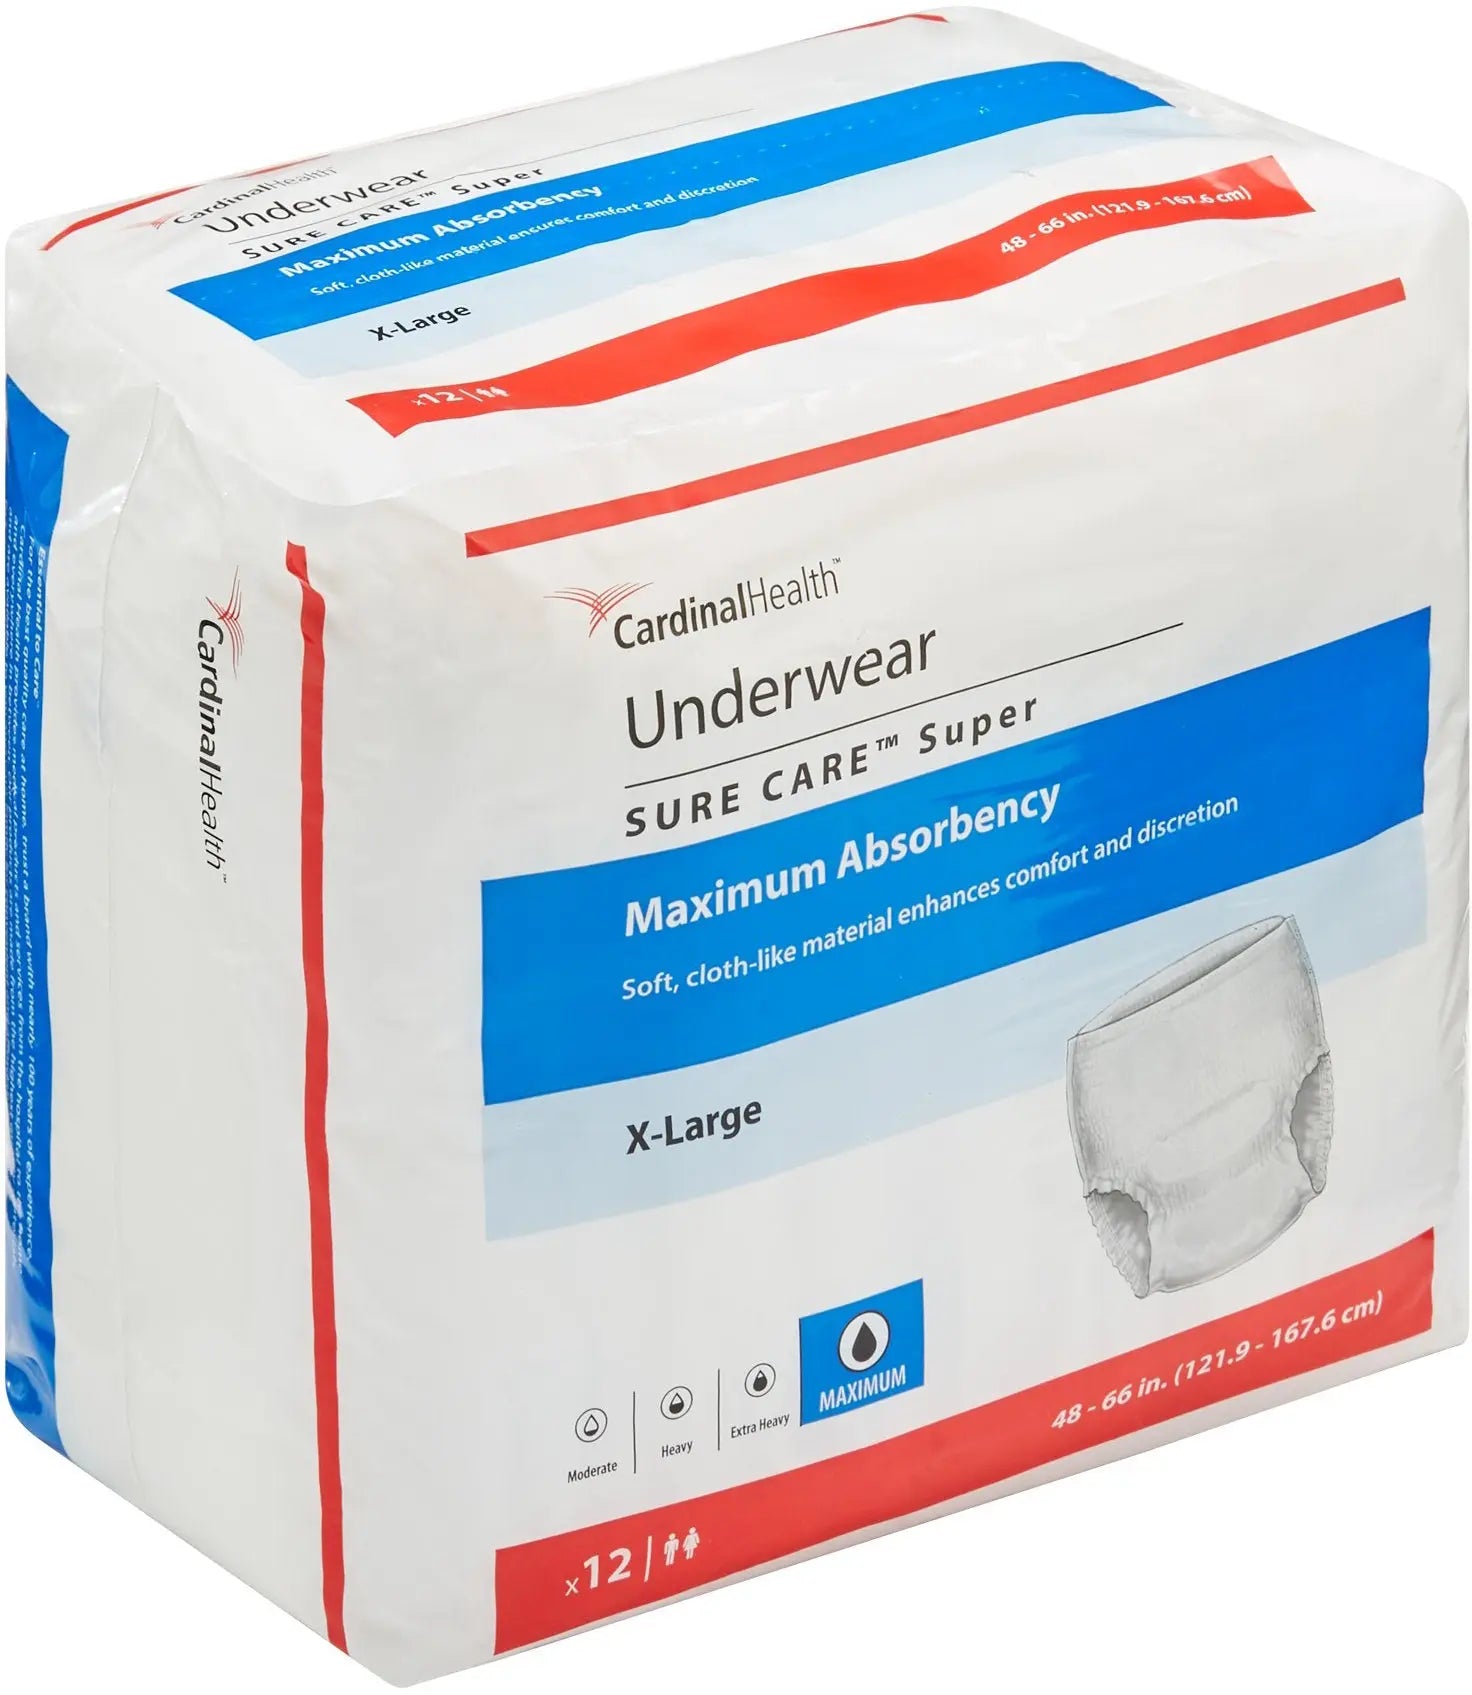 Sure Care Plus Protective Underwear - WellBefore